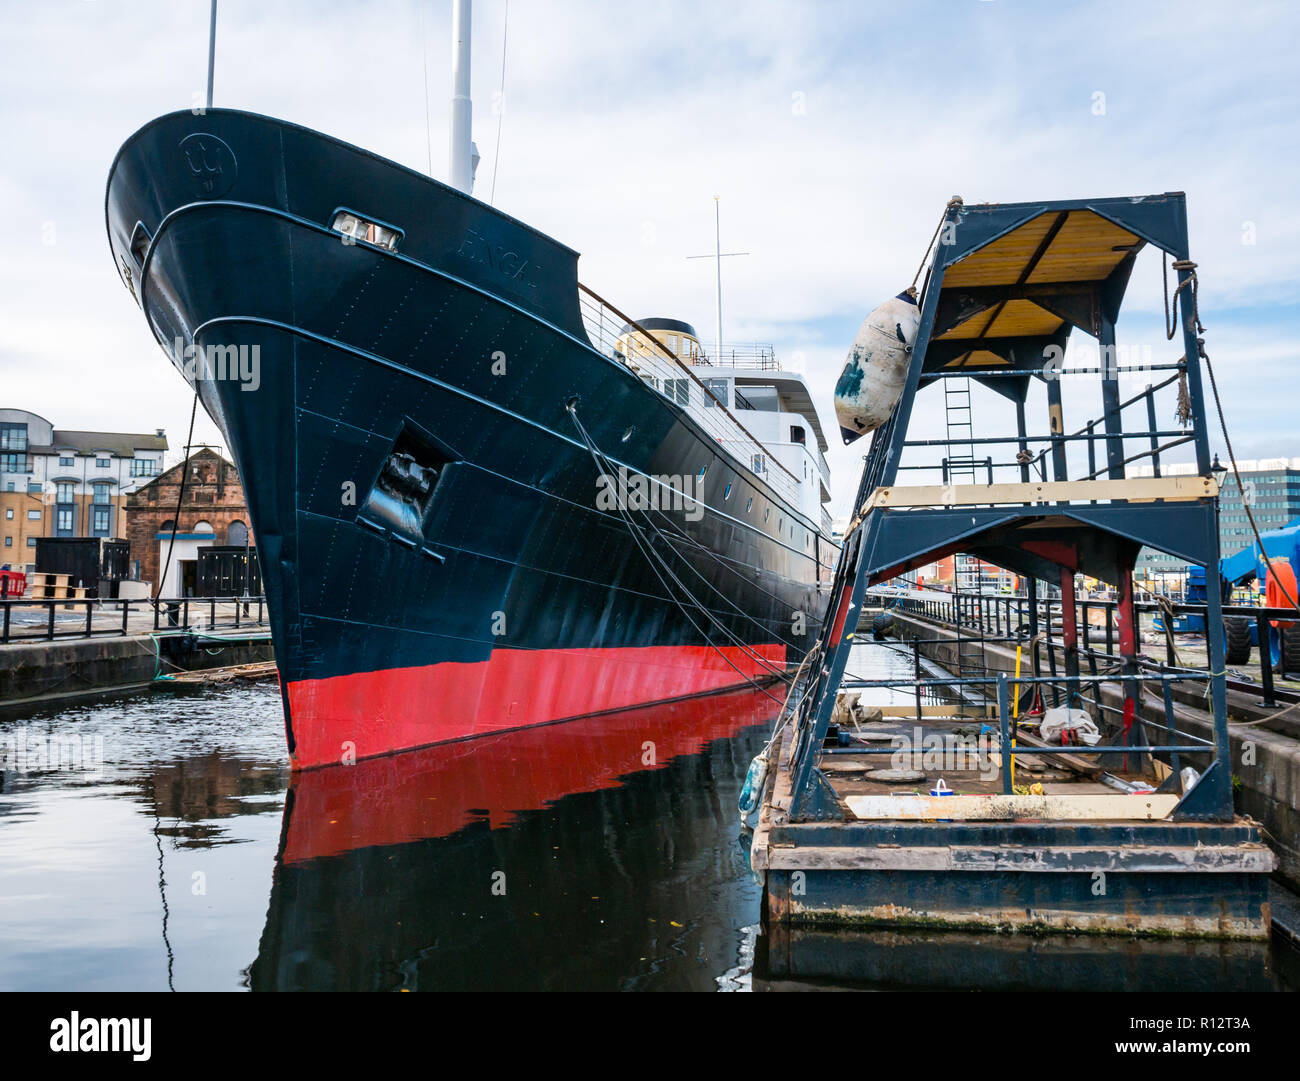 Leith, Edinburgh, Scotland, United Kingdom, 8th November 2018. Royal Yacht Britannia floating hotel moves to permanent mooring: MV Fingal, former lighthouse tender ship has been repainted and moved to Alexandra Dock in the historic Port of Leith. It has been undergoing a refit to transform it into a 23 bedroom hotel. Construction work is going on to create an entrance site. The 5 star luxury floating hotel will open in January 2019 Stock Photo